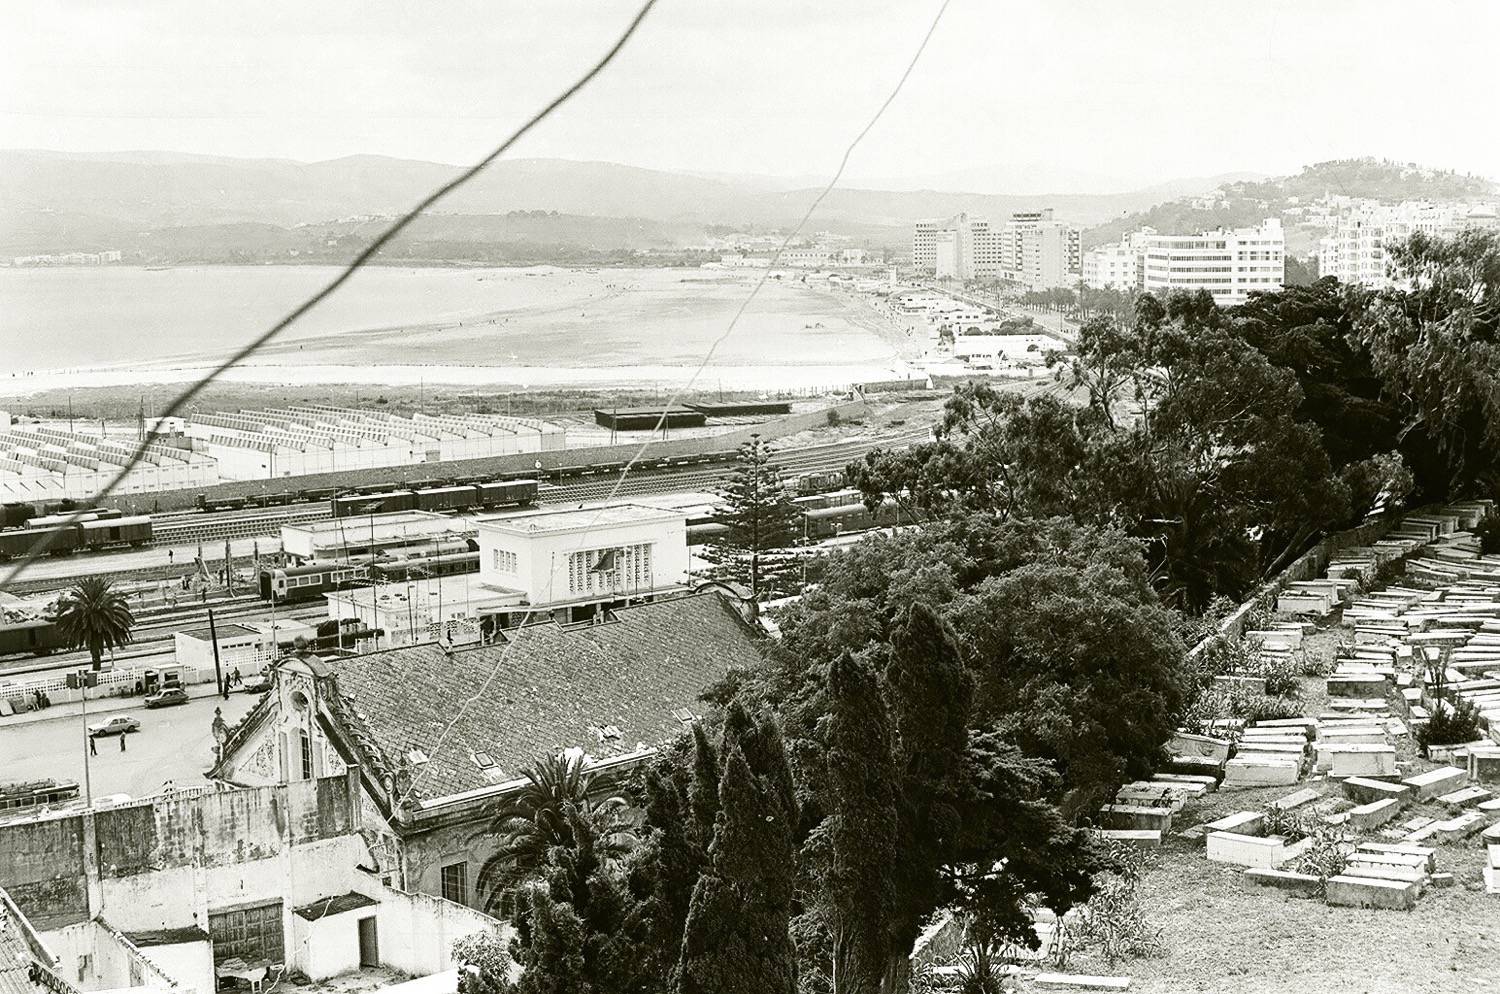 Jewish Cemetery of Tangier - View toward the Train Station over the Renschhausen Terrace, with the Jewish Cemetery on the right